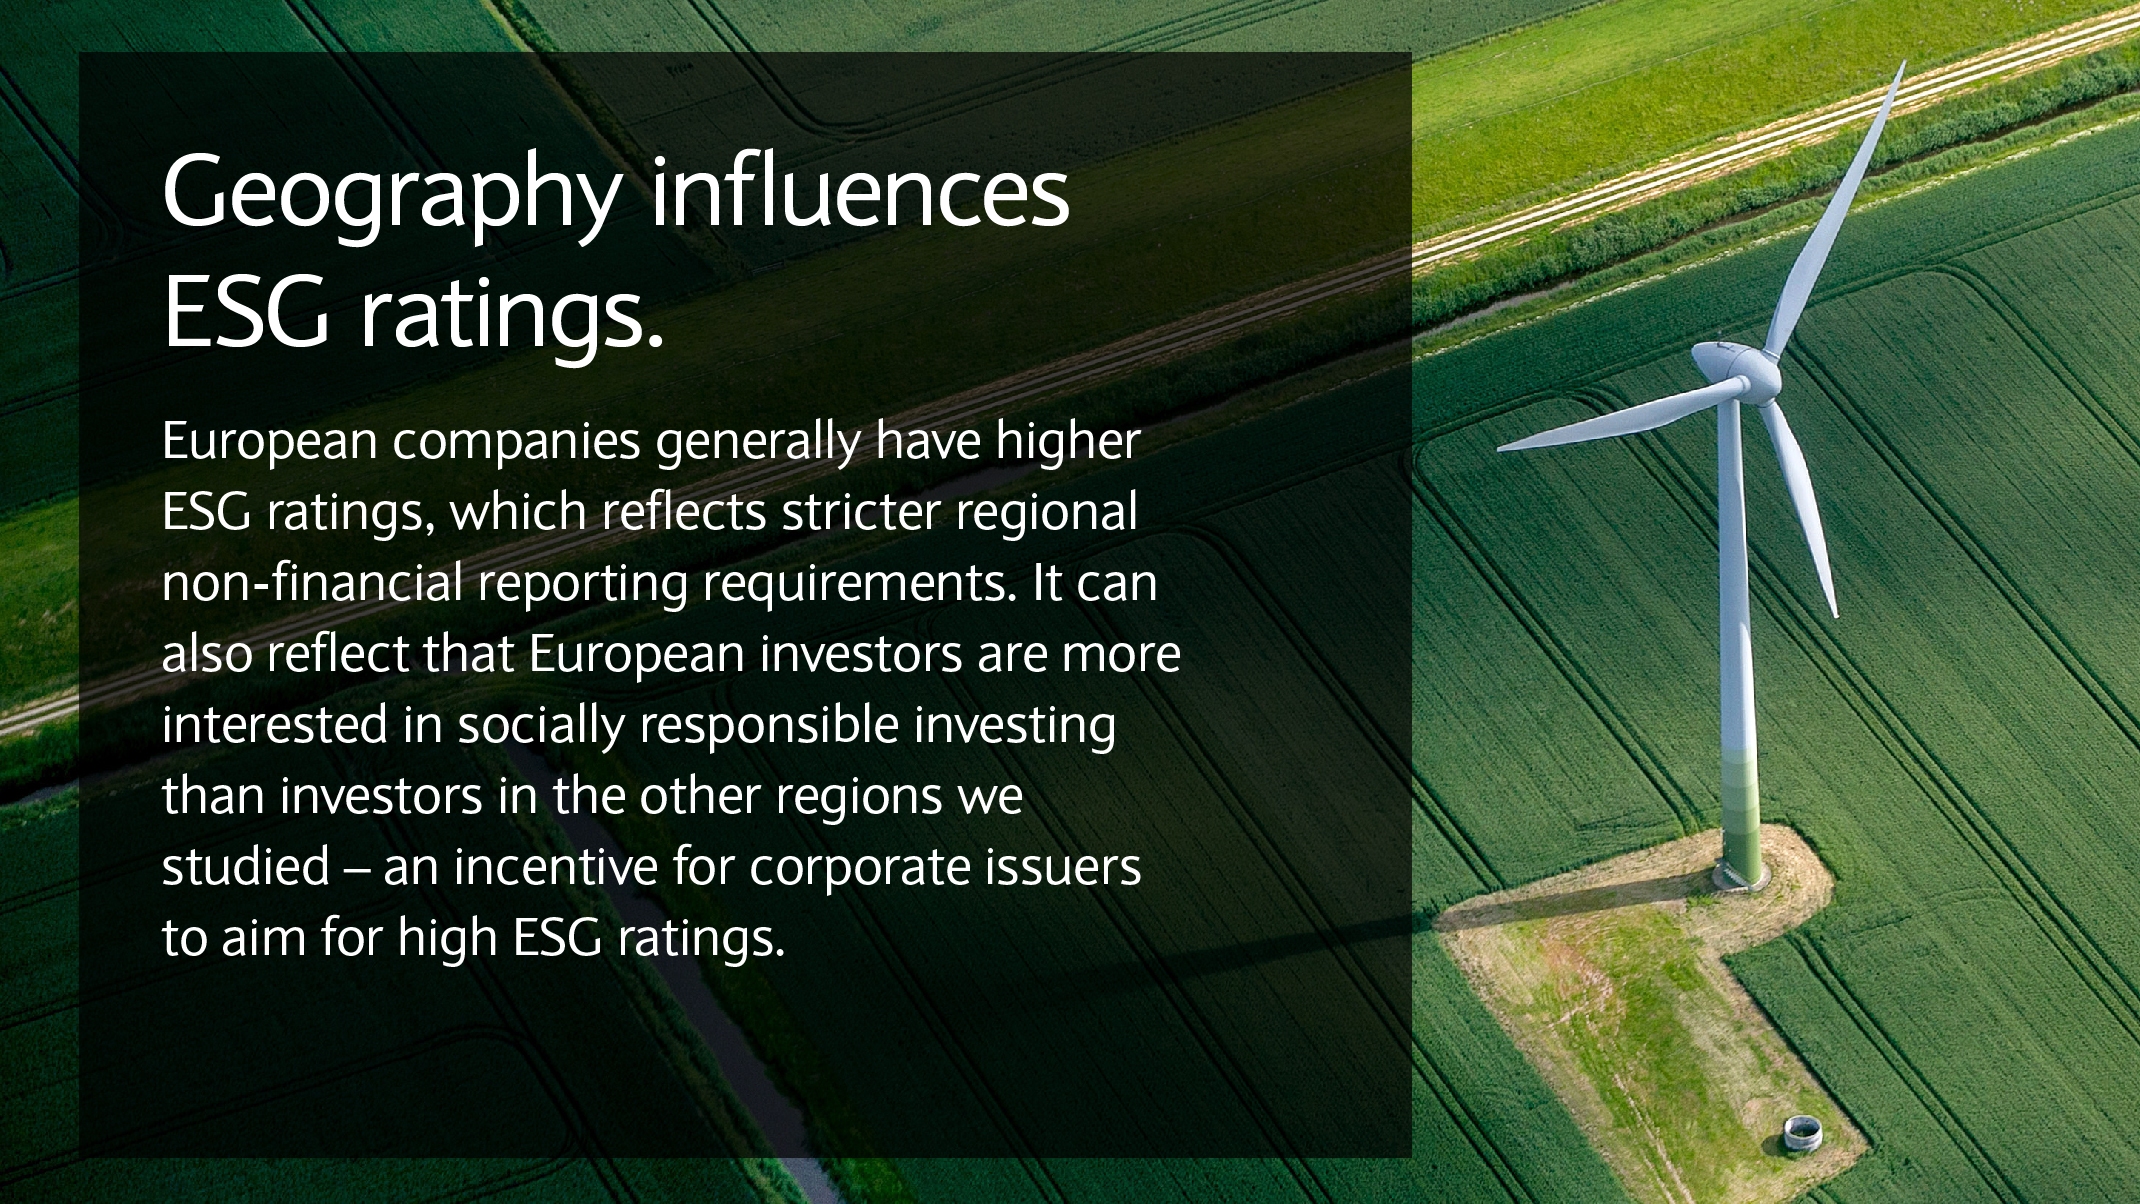 Geography influences ESG ratings. European companies generally have higher ESG ratings.